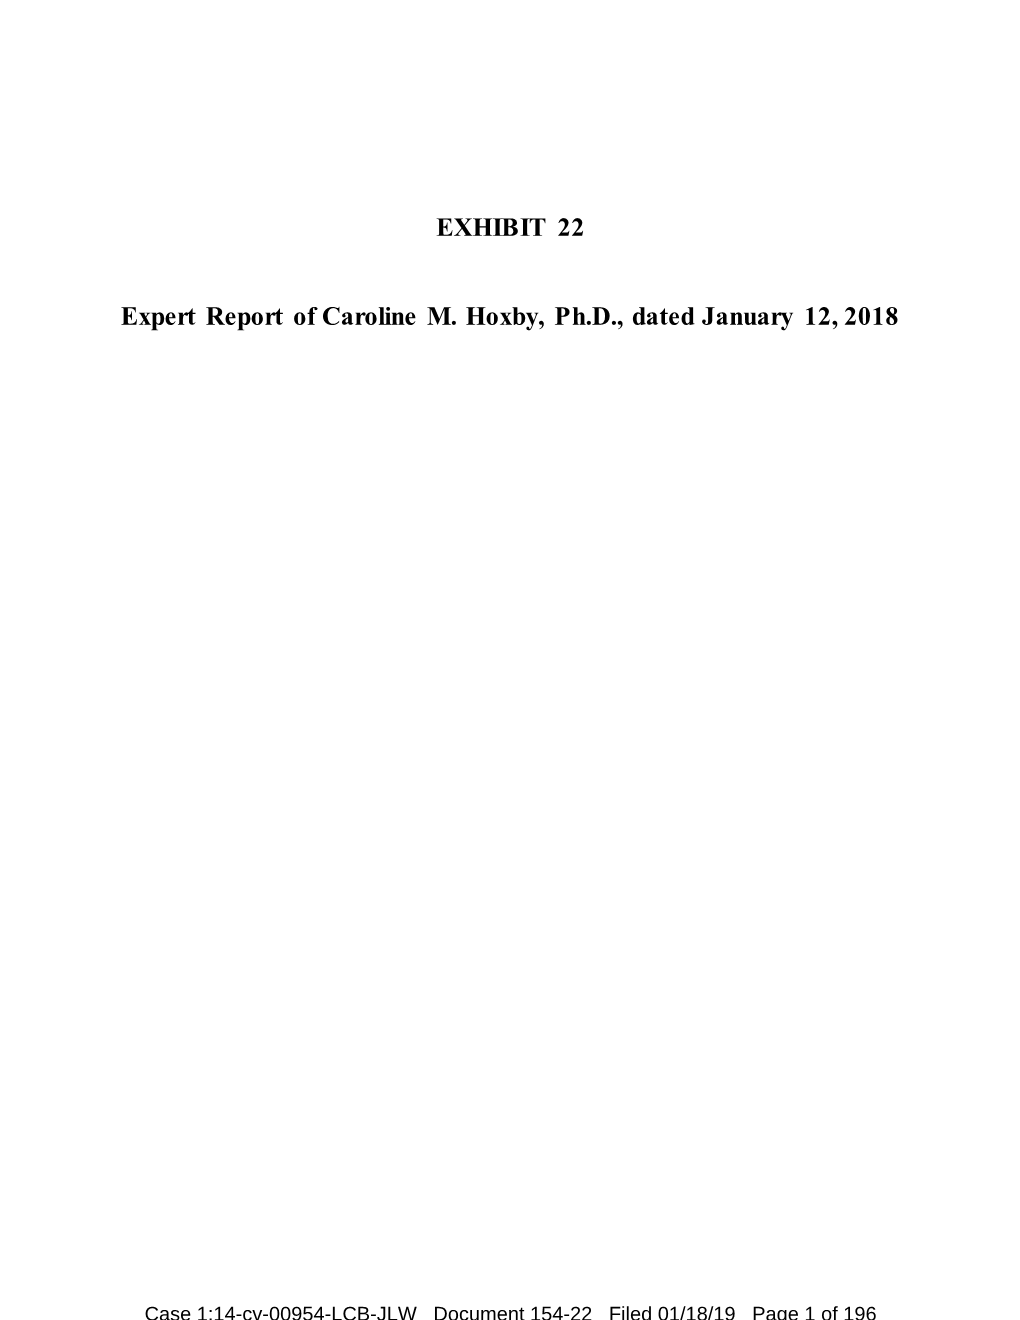 EXHIBIT 22 Expert Report of Caroline M. Hoxby, Ph.D., Dated January 12